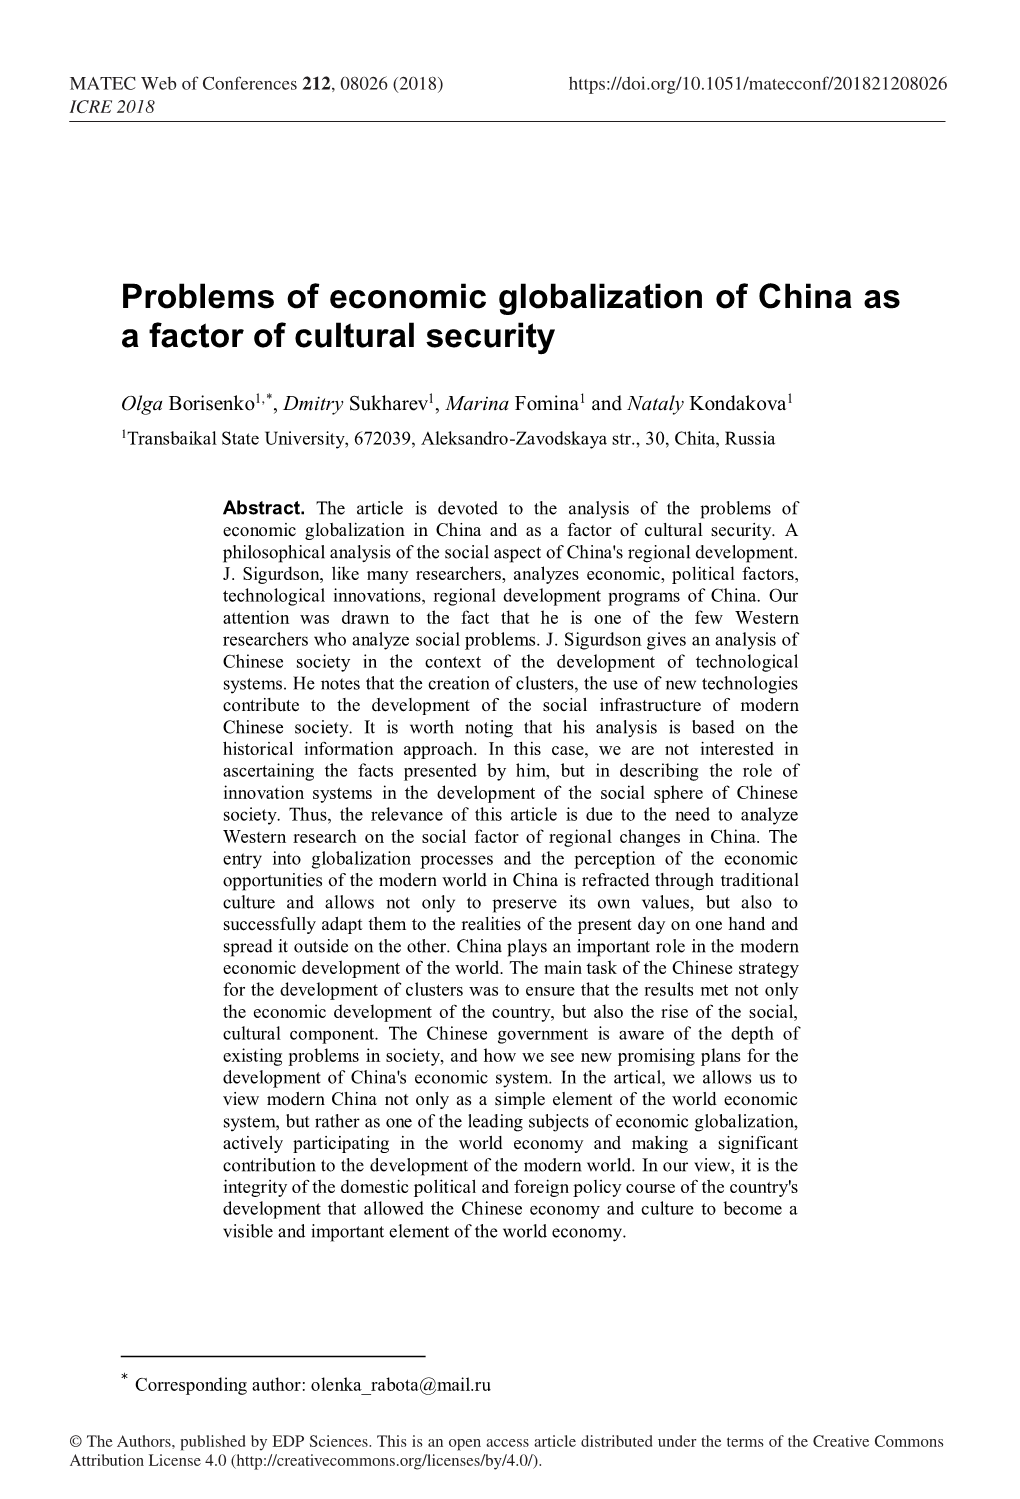 Problems of Economic Globalization of China As a Factor of Cultural Security